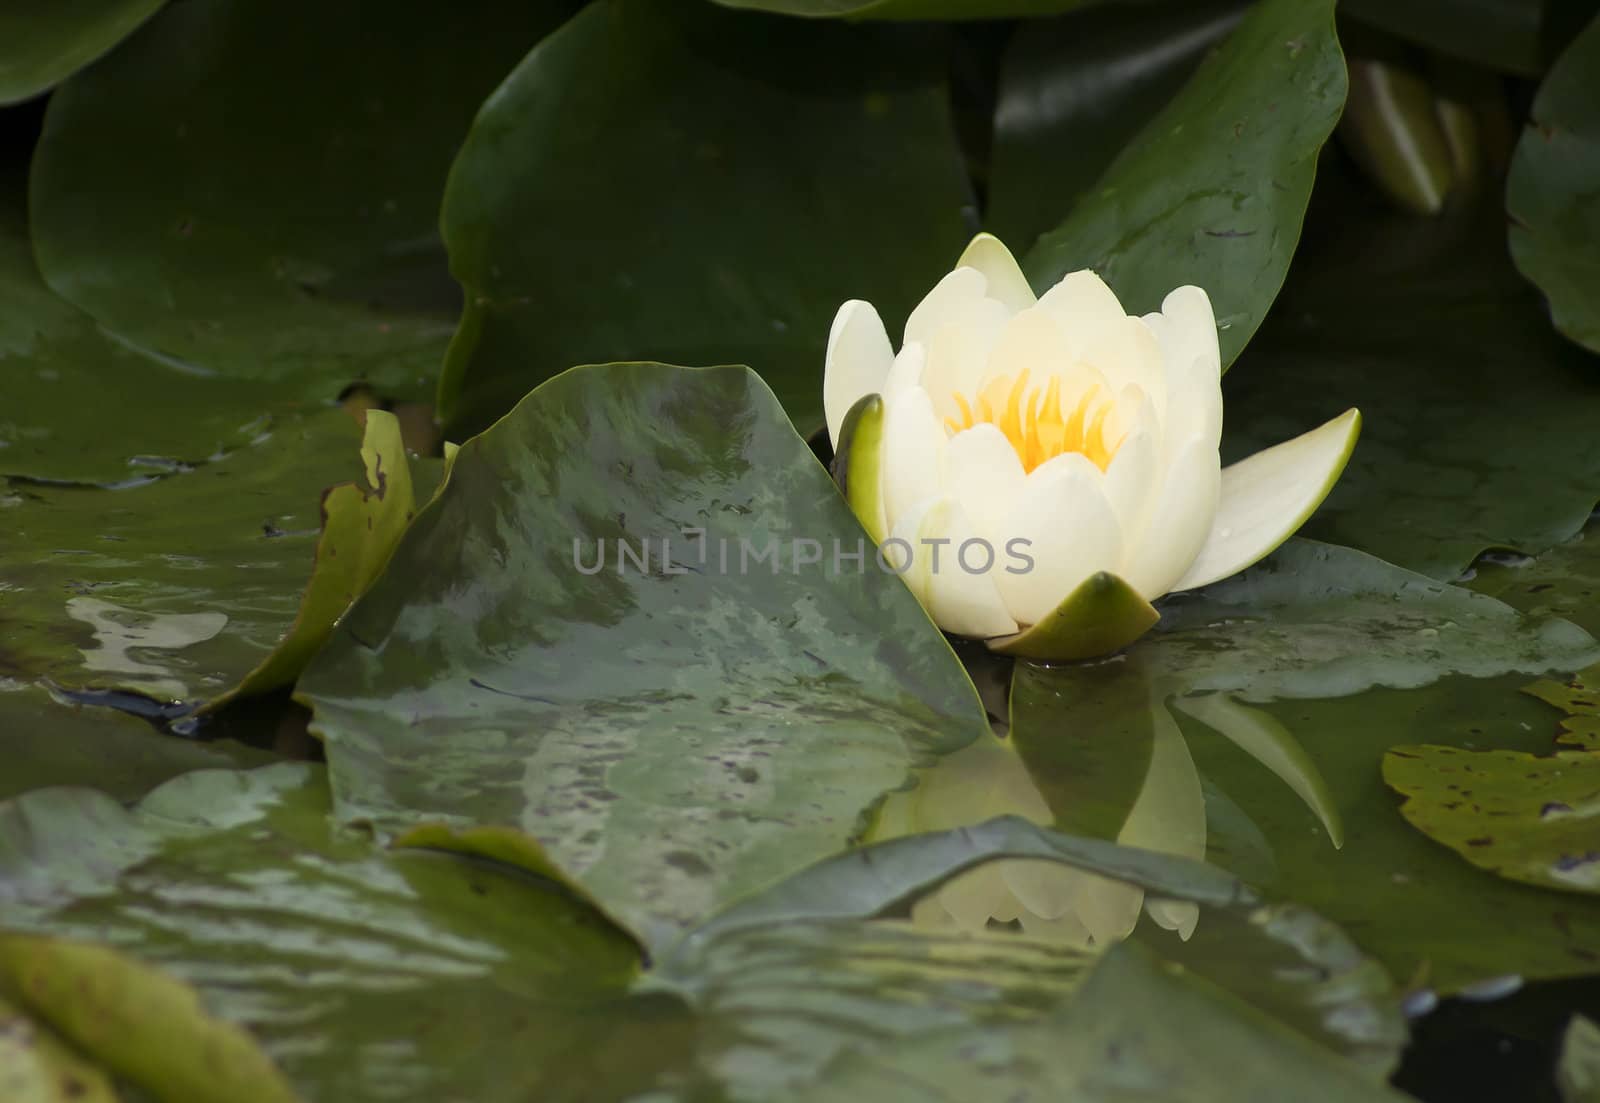 Water lily among the leaves at a pond